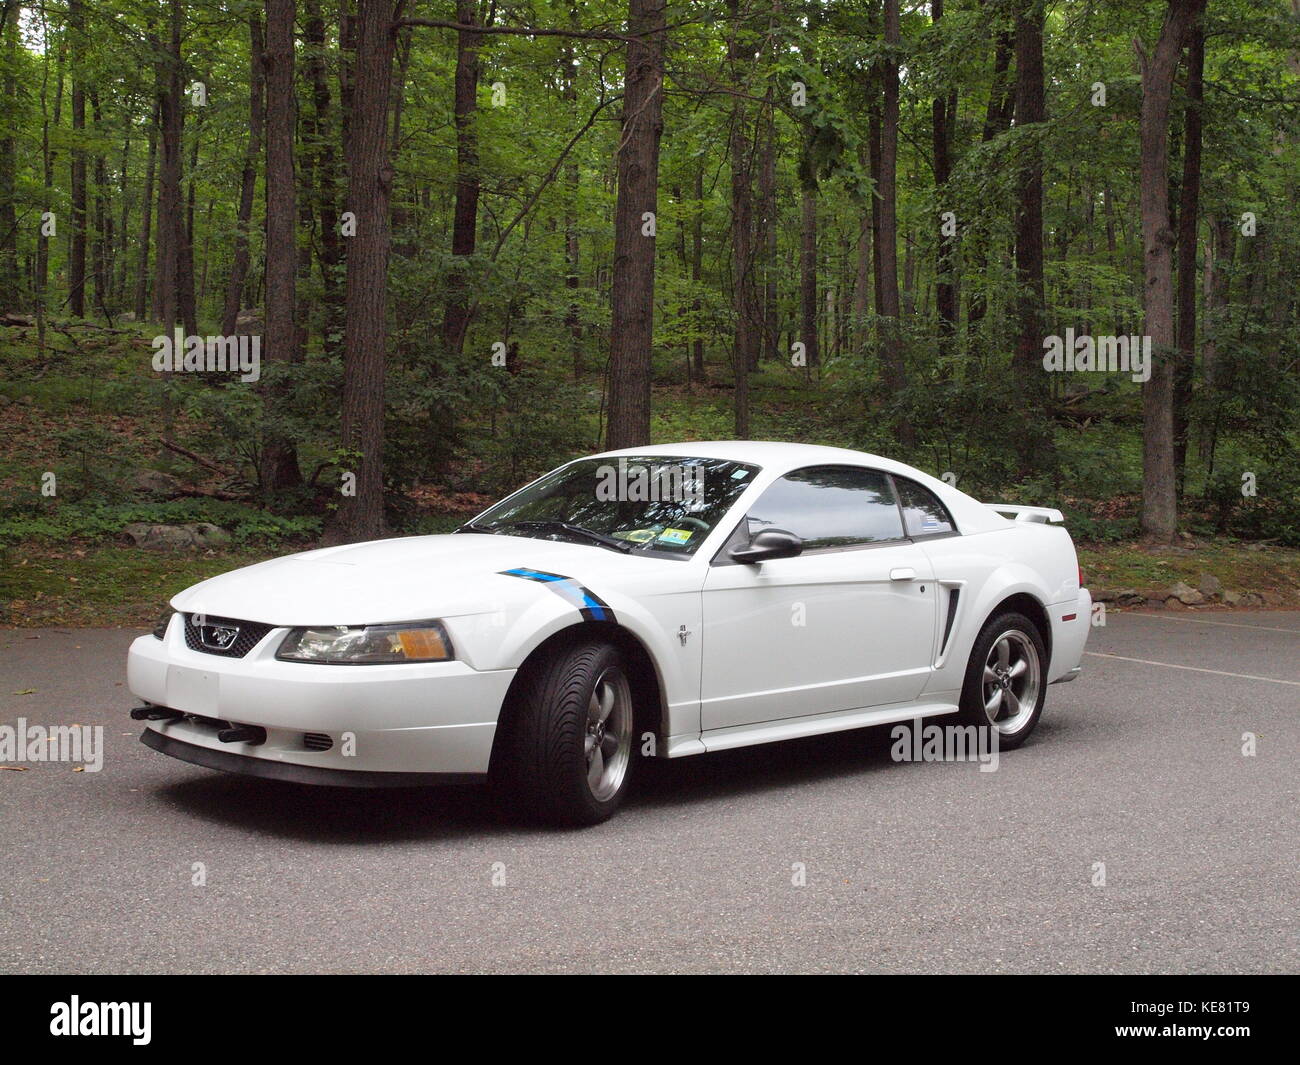 White Ford Mustang at Morris County Park in New Jersey showing blue and black law enforcement fender stripes Stock Photo